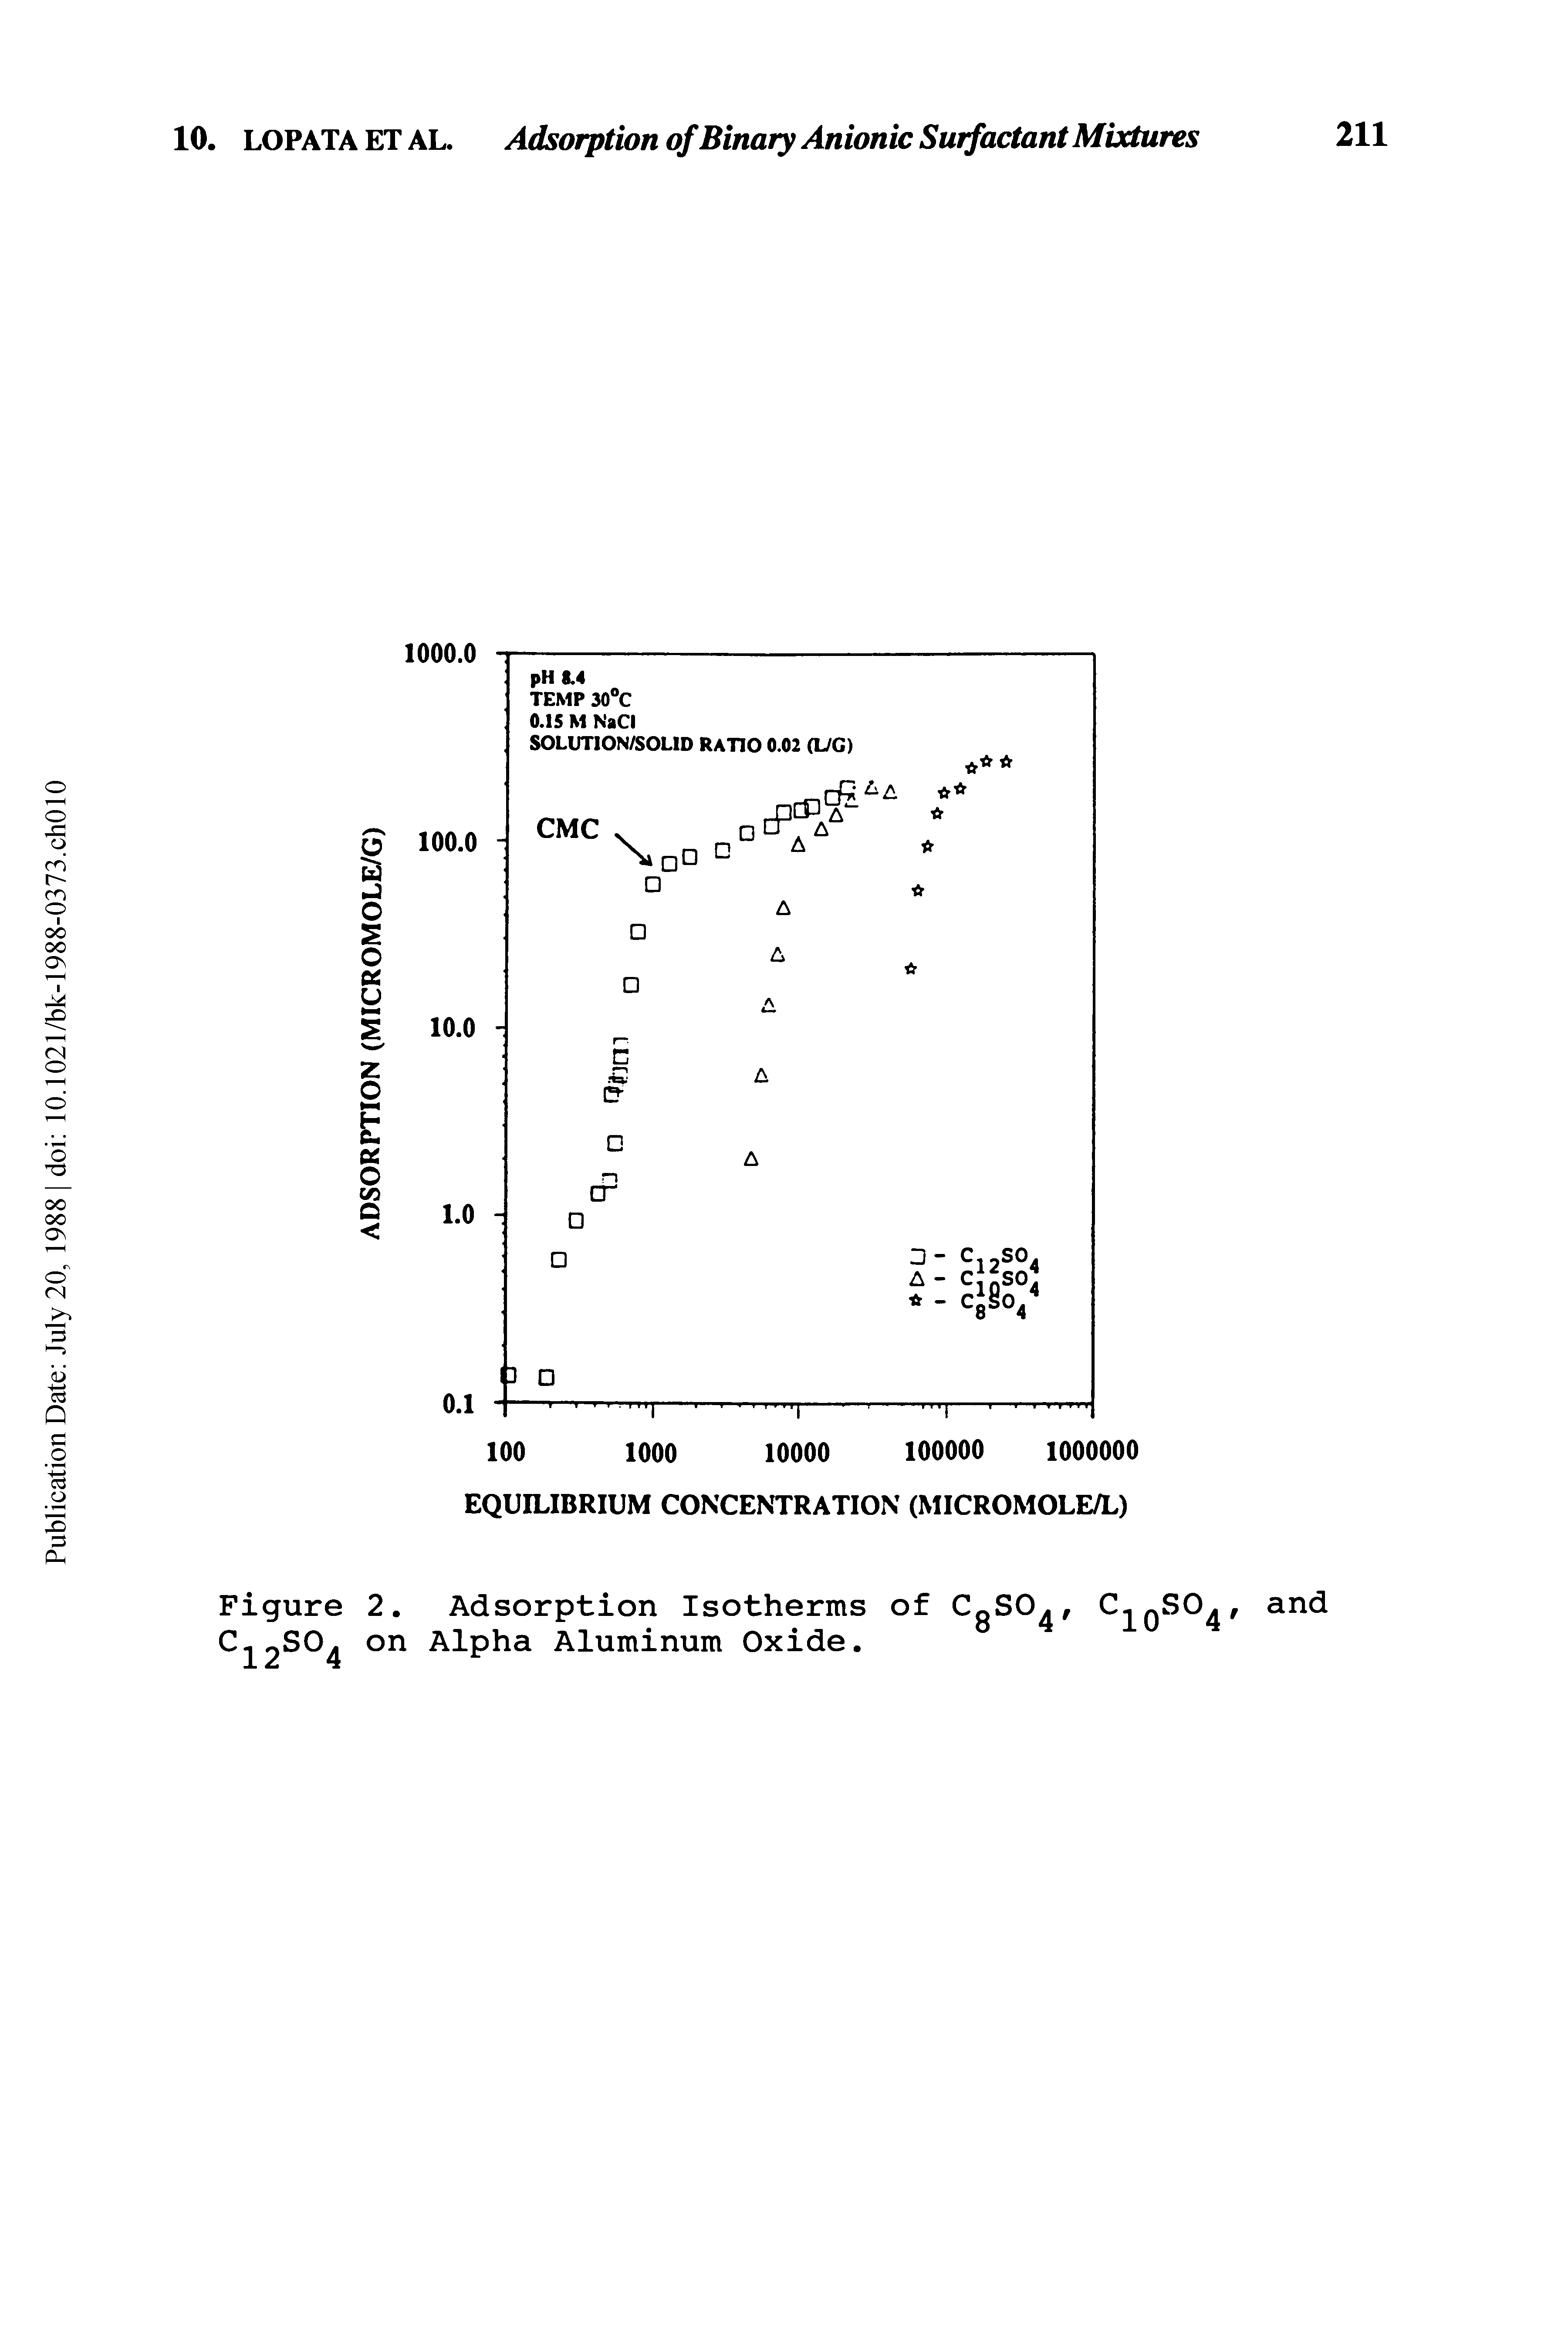 Figure 2. Adsorption Isotherms of CgSO, C10SO4, C12SO4 on Alpha Aluminum Oxide.